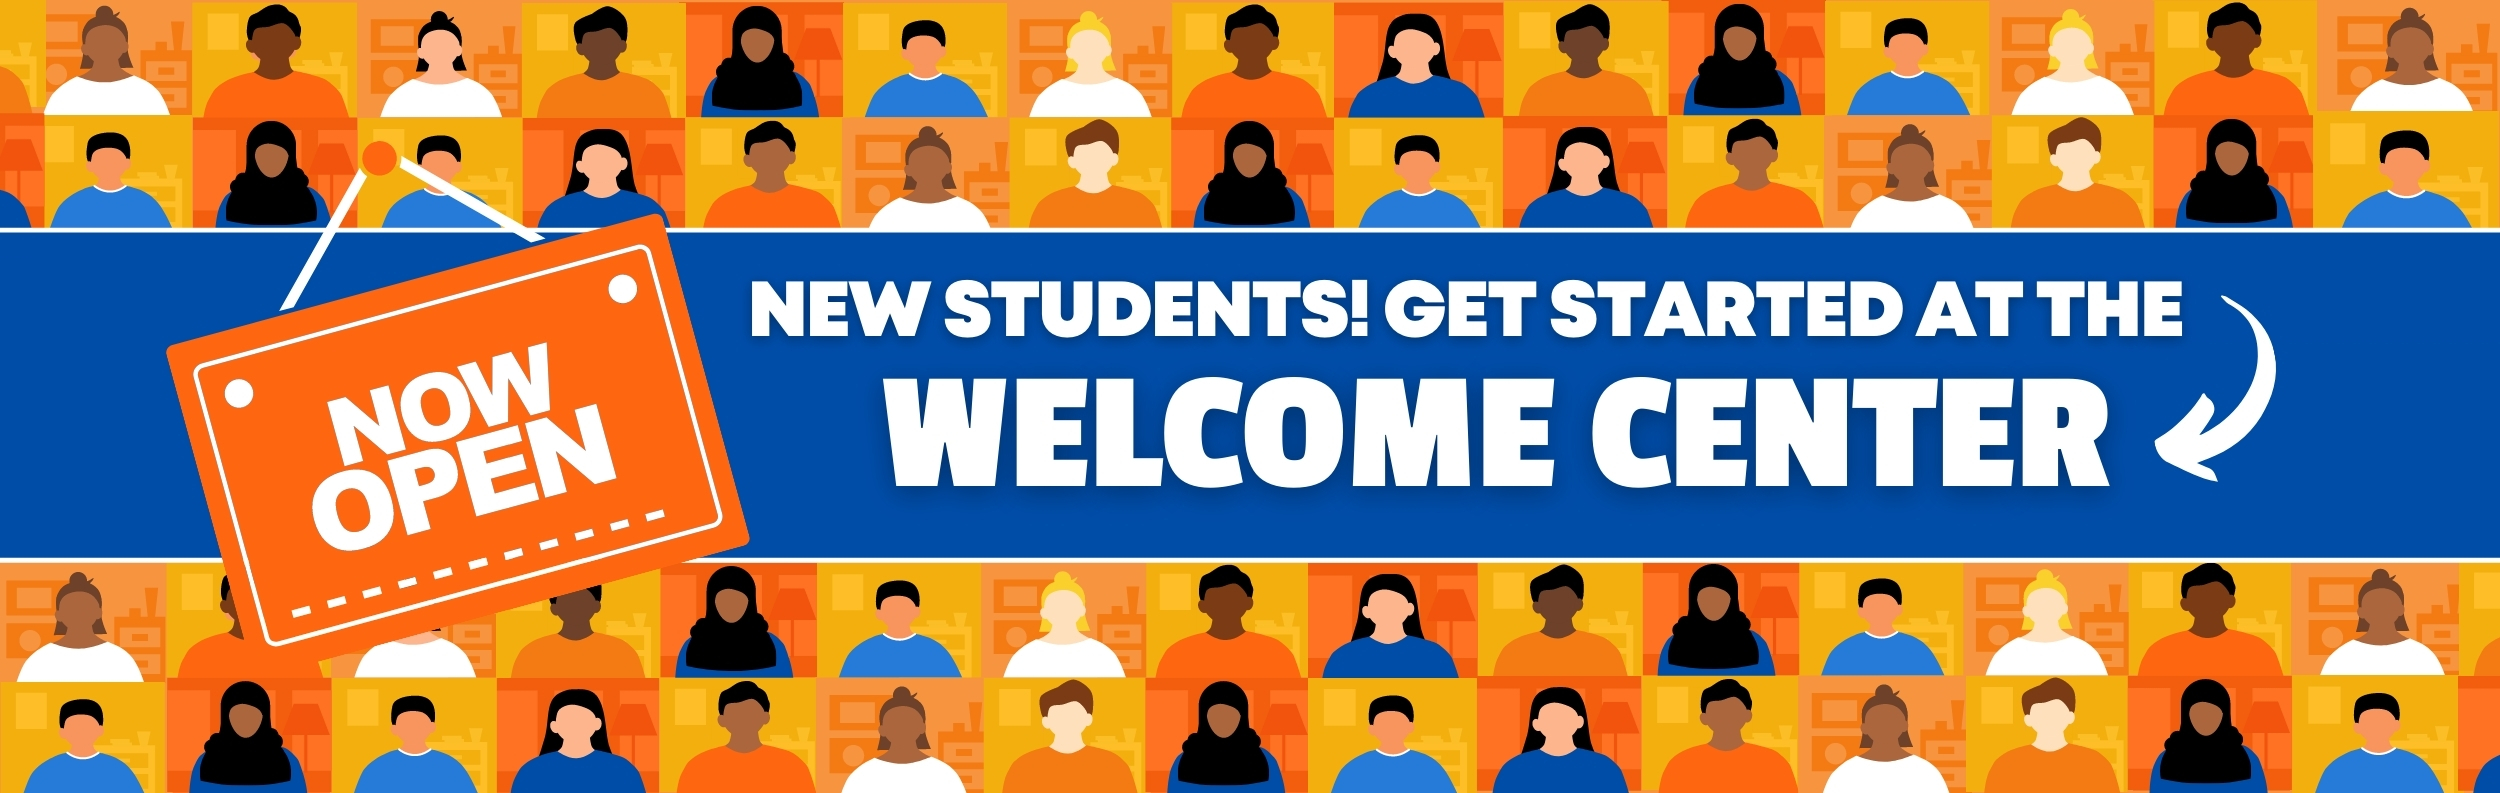  New Students! Get Started at the Welcome Center  